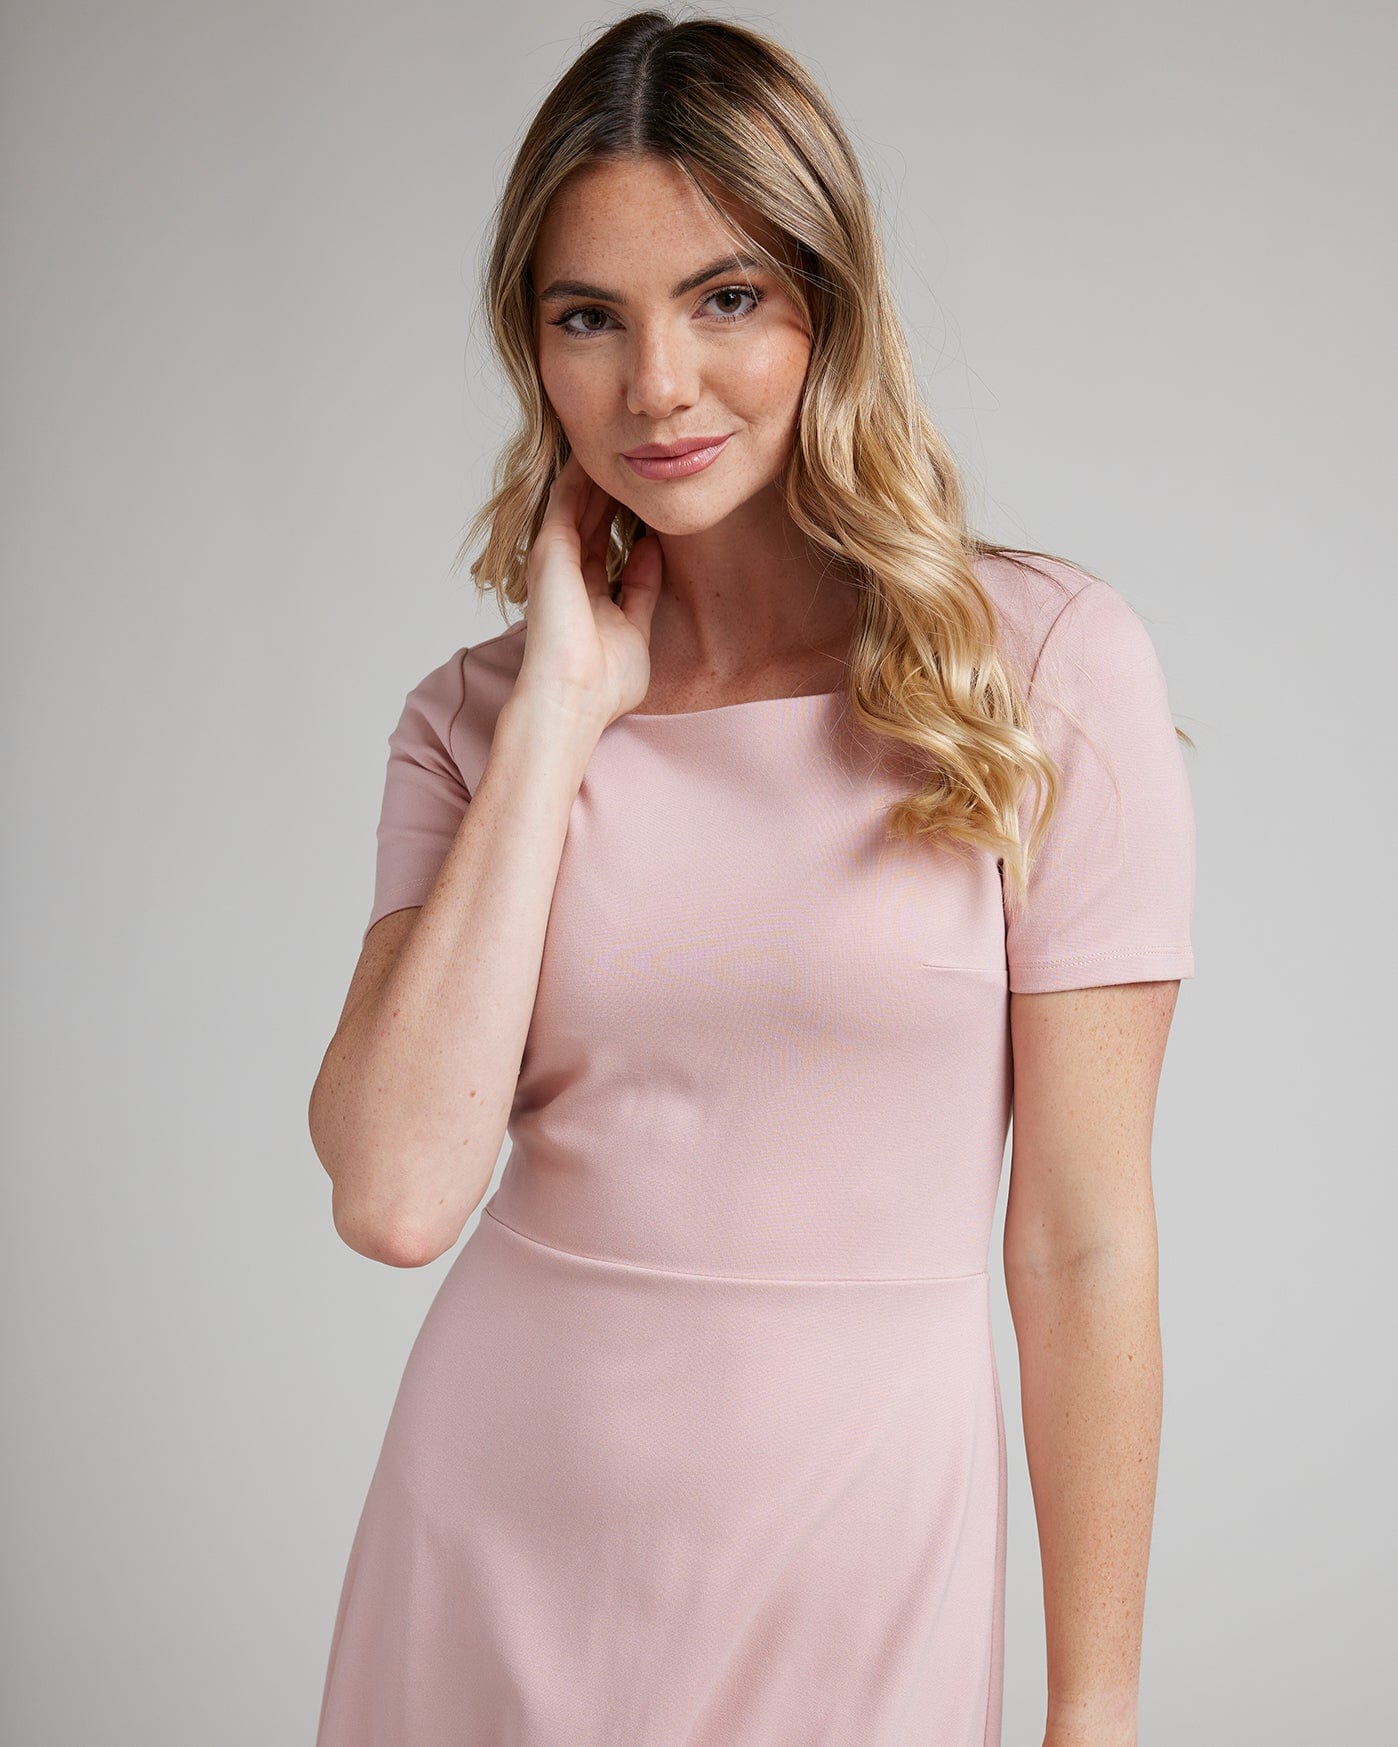 Woman in a short sleeve, knee-length simple pink dress